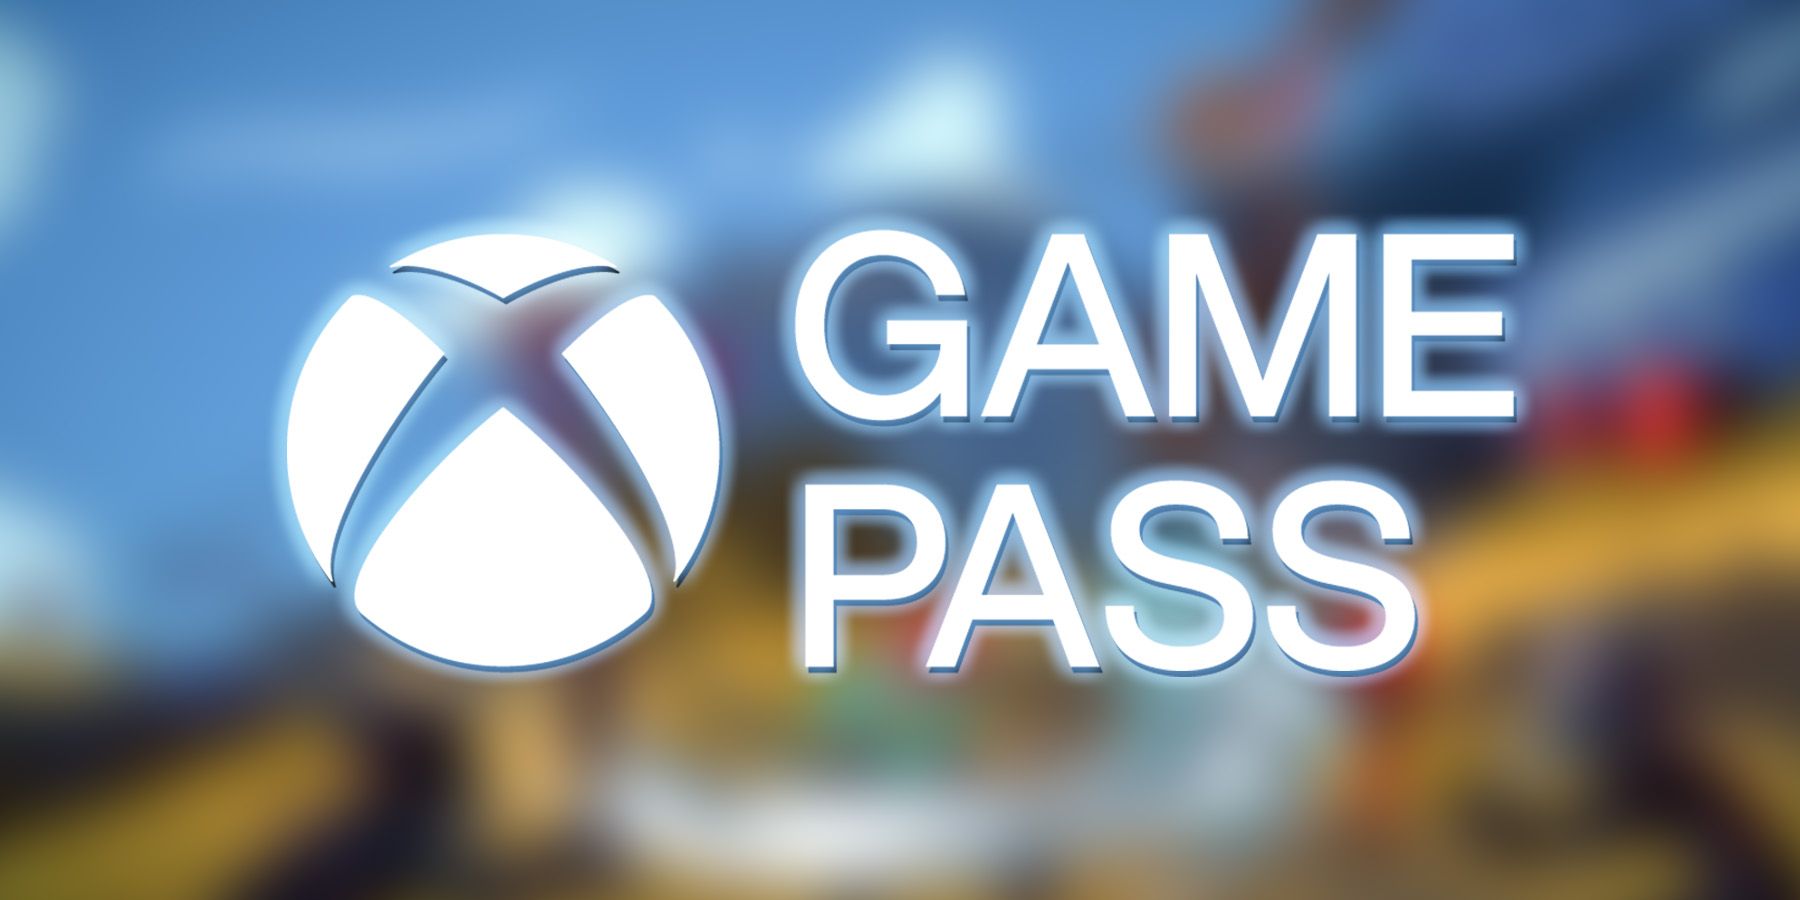 Xbox Game Pass abridged white logo with blue glow on blurred Dungeons of Hinterberg Alps combat screenshot